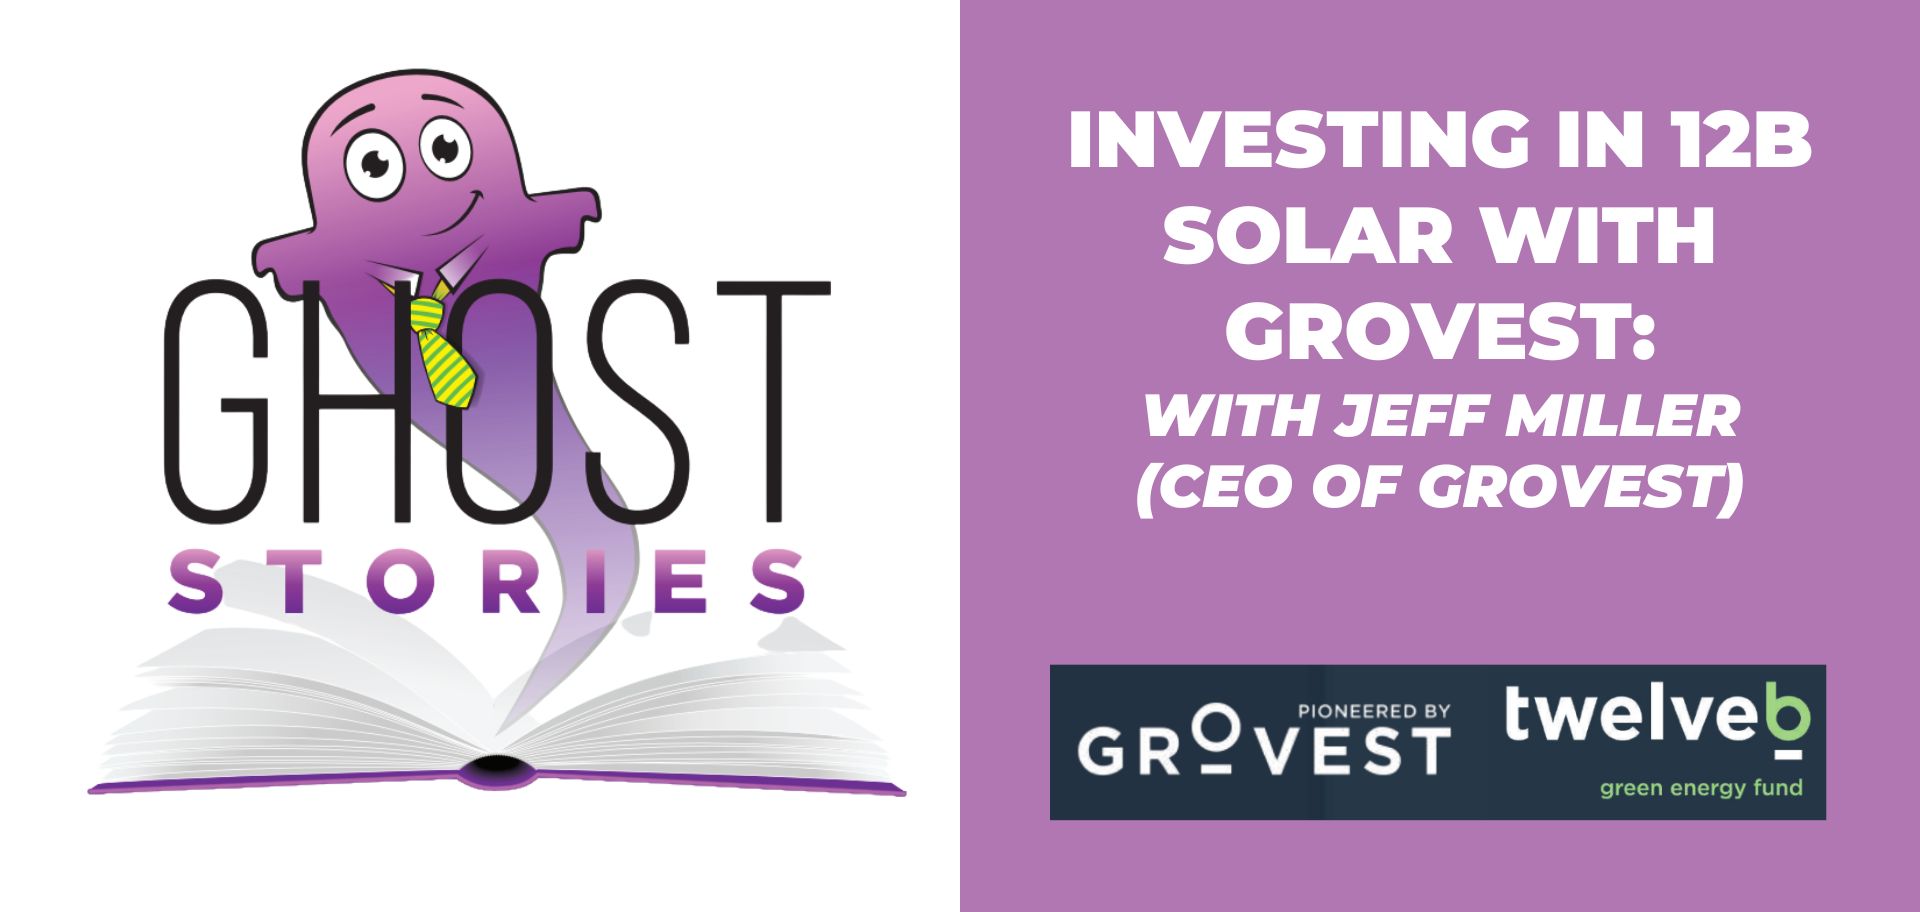 Ghost Stories #11: Investing in 12B Solar with Grovest (with Jeff Miller, CEO Grovest)